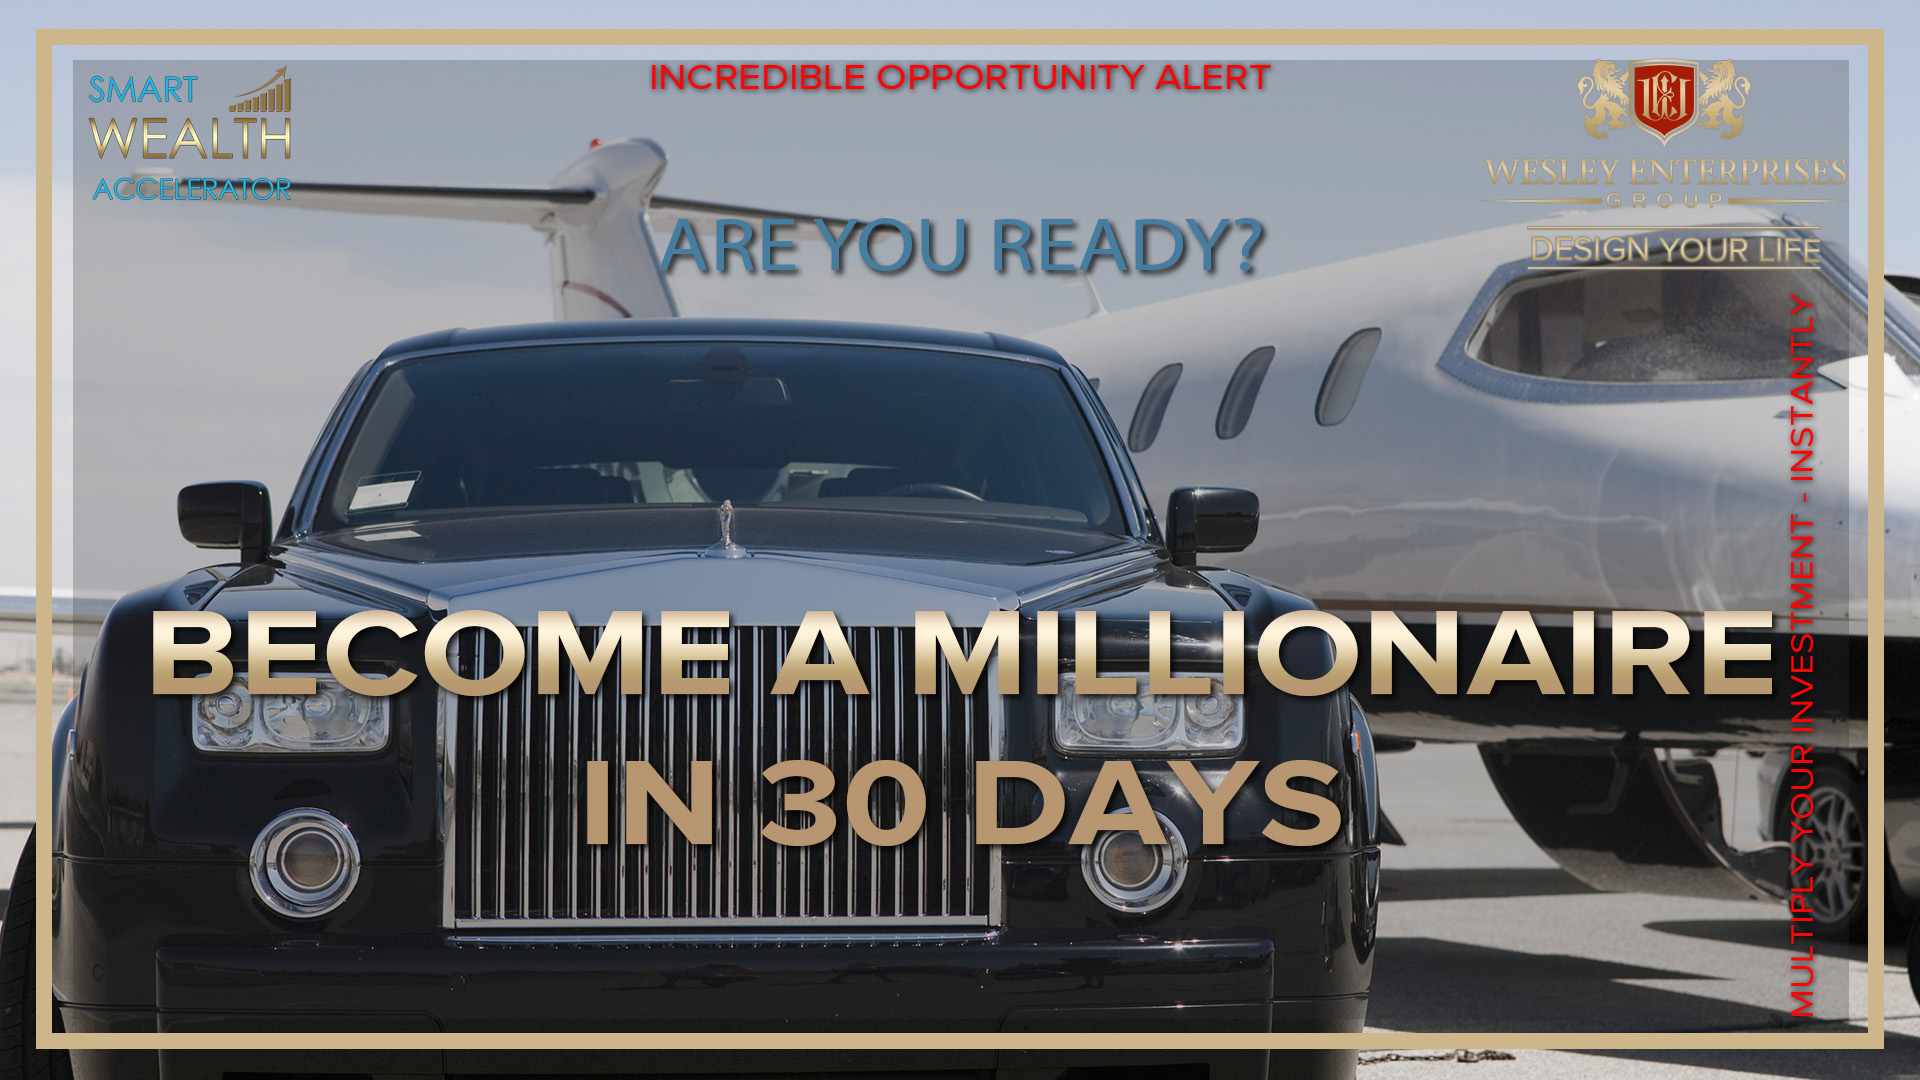 Become a millionaire - are you ready?